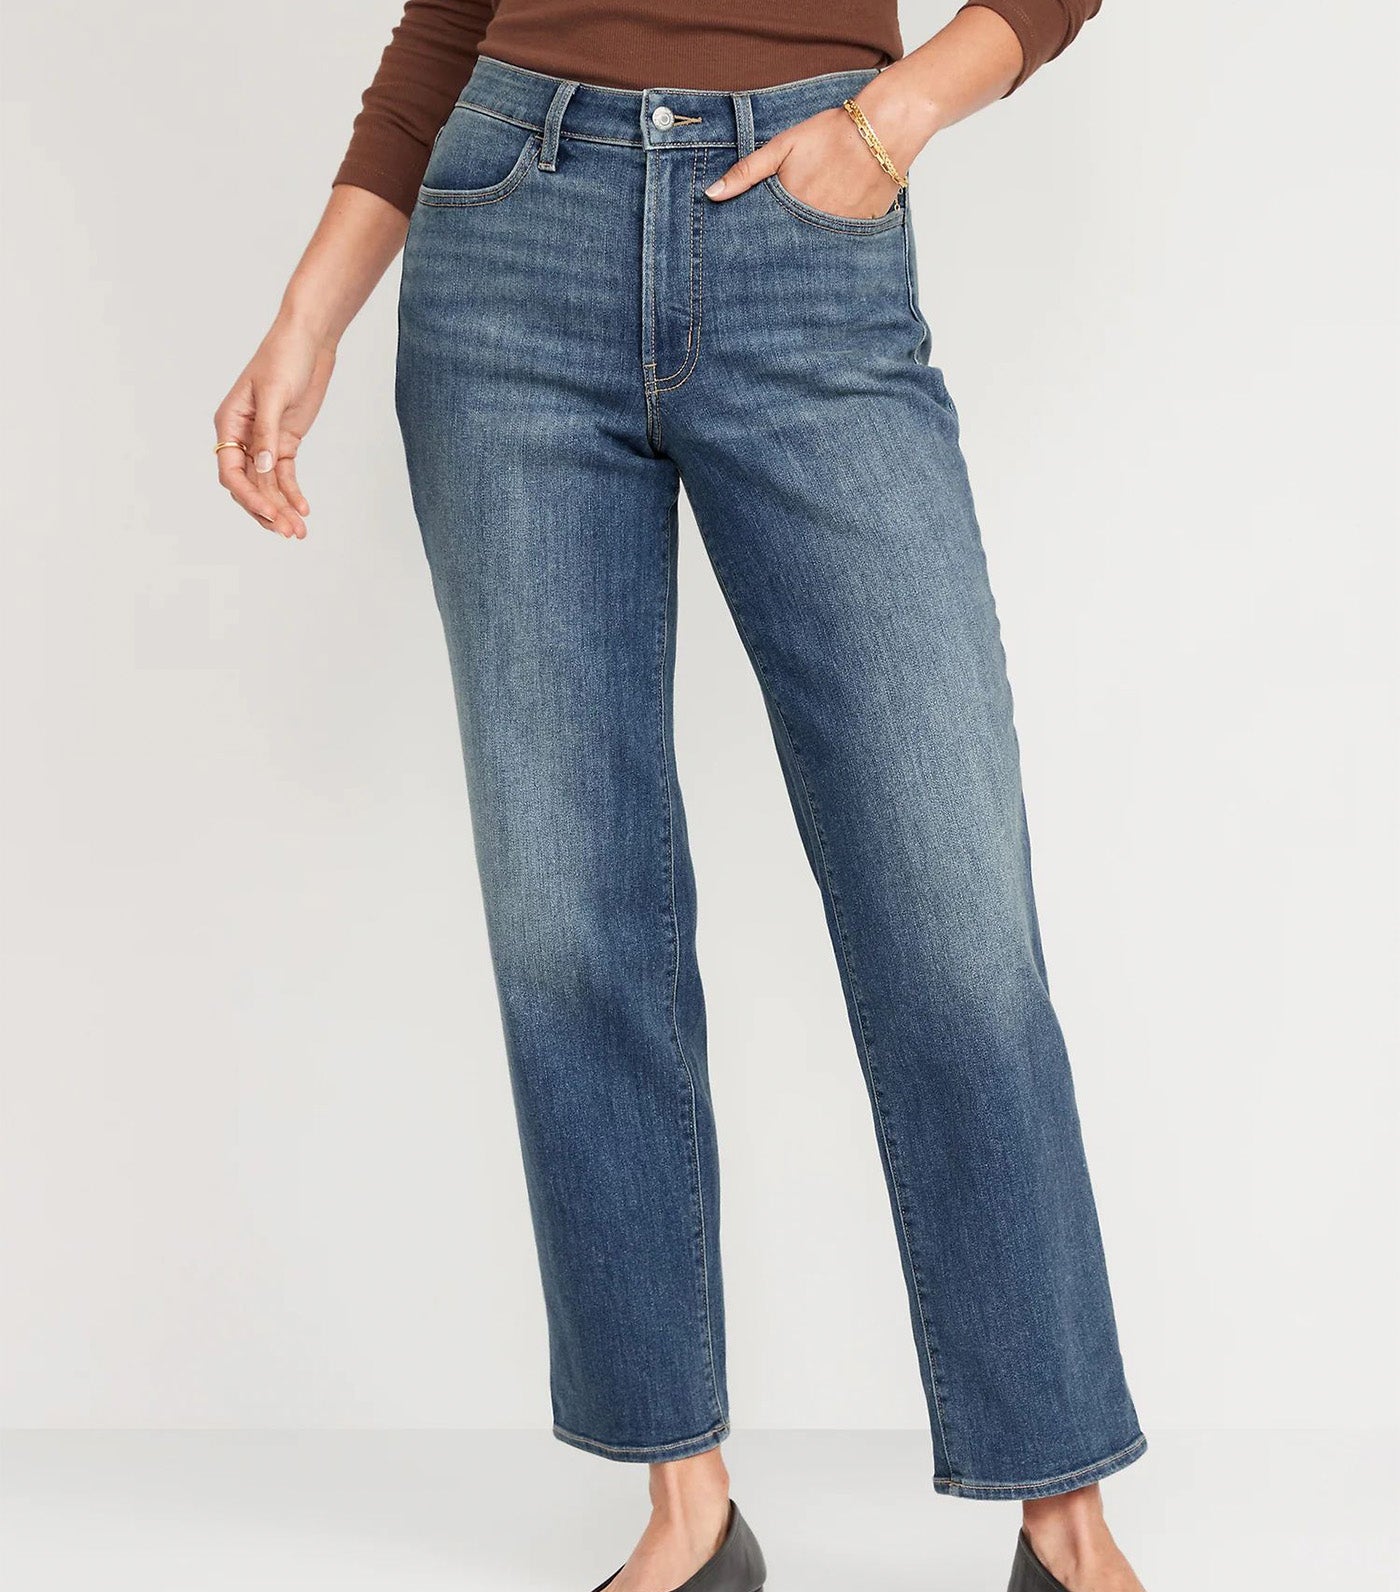 High-Waisted Wow Loose Jeans for Women Campeche